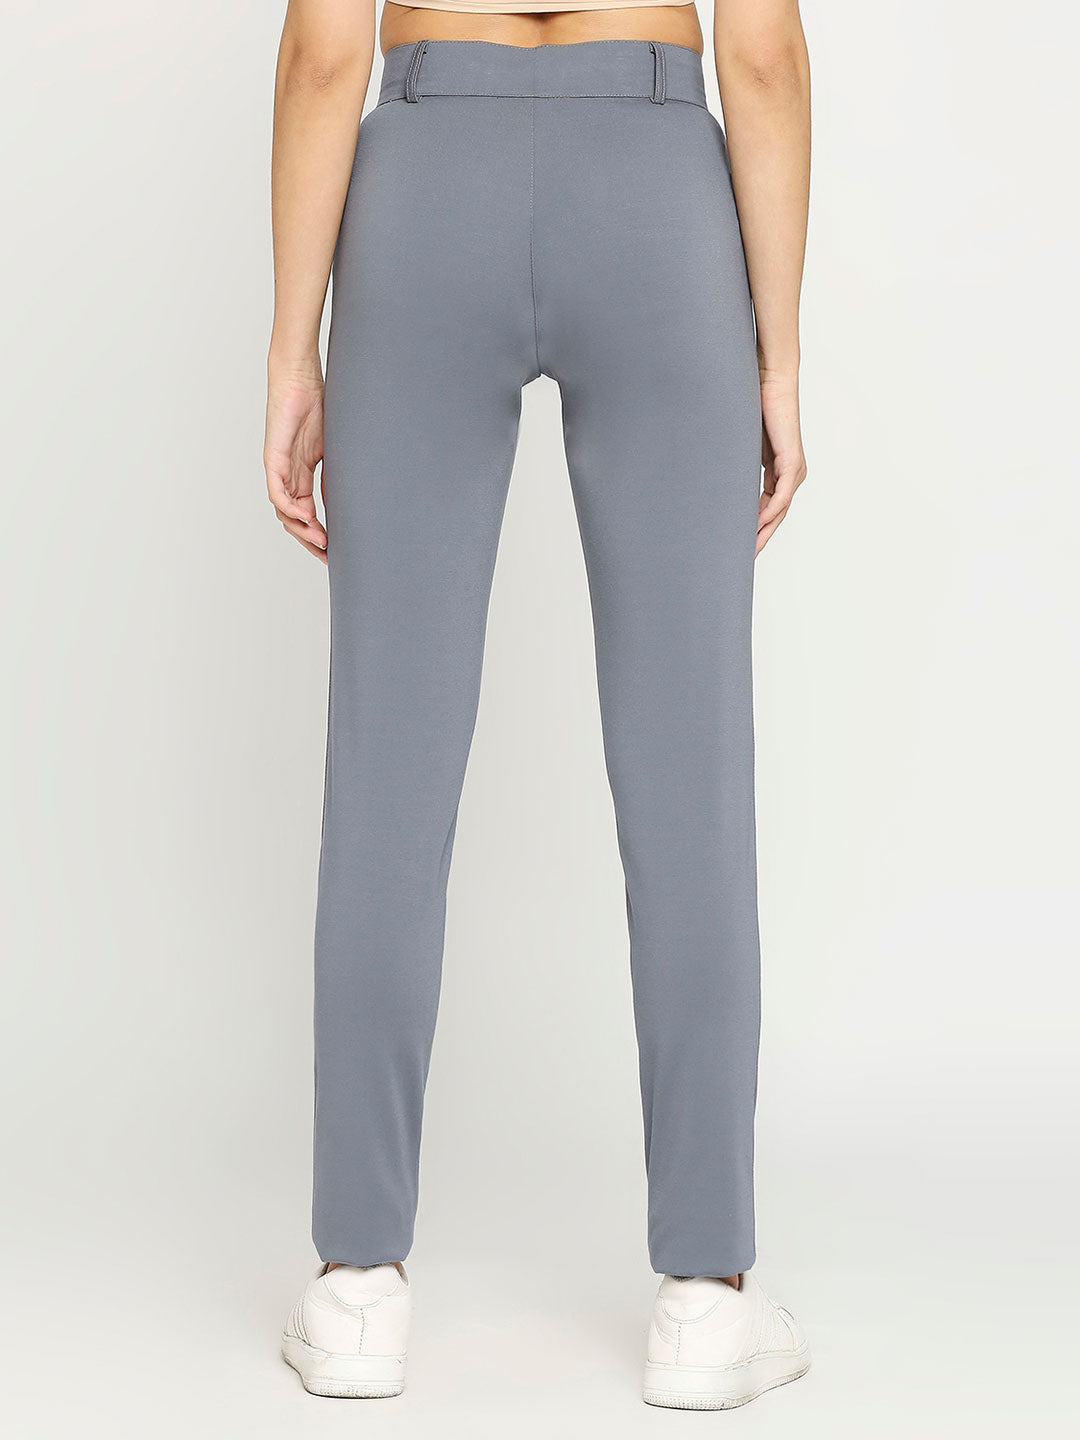 Women's Golf Pants with Welt Pockets - Grey